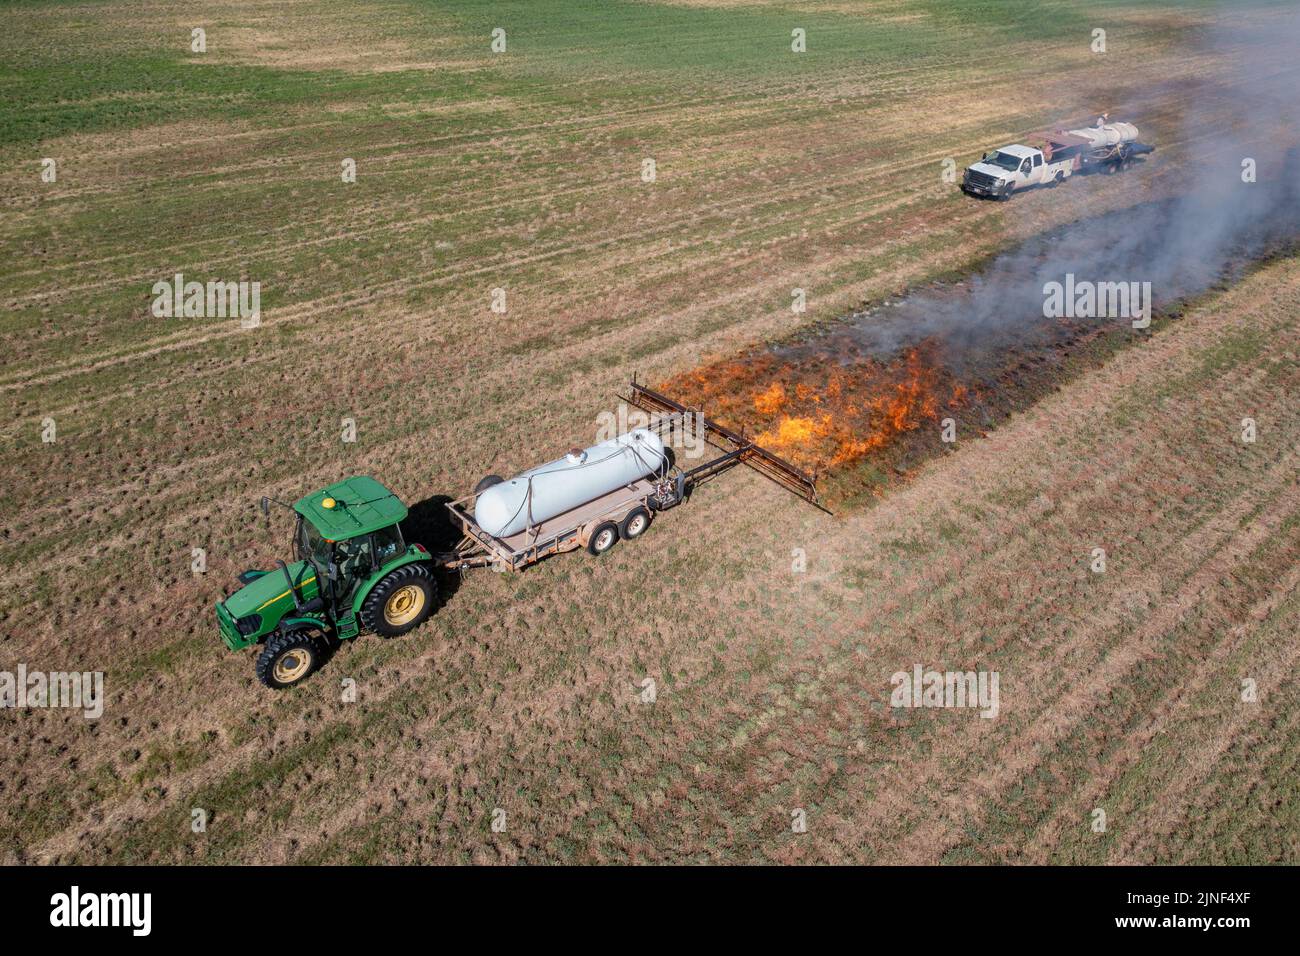 A tractor pulls a propane burner to burn weeds in an hay field after cutting the alfalfa on a ranch in Utah.  A water truck follows to control the fir Stock Photo